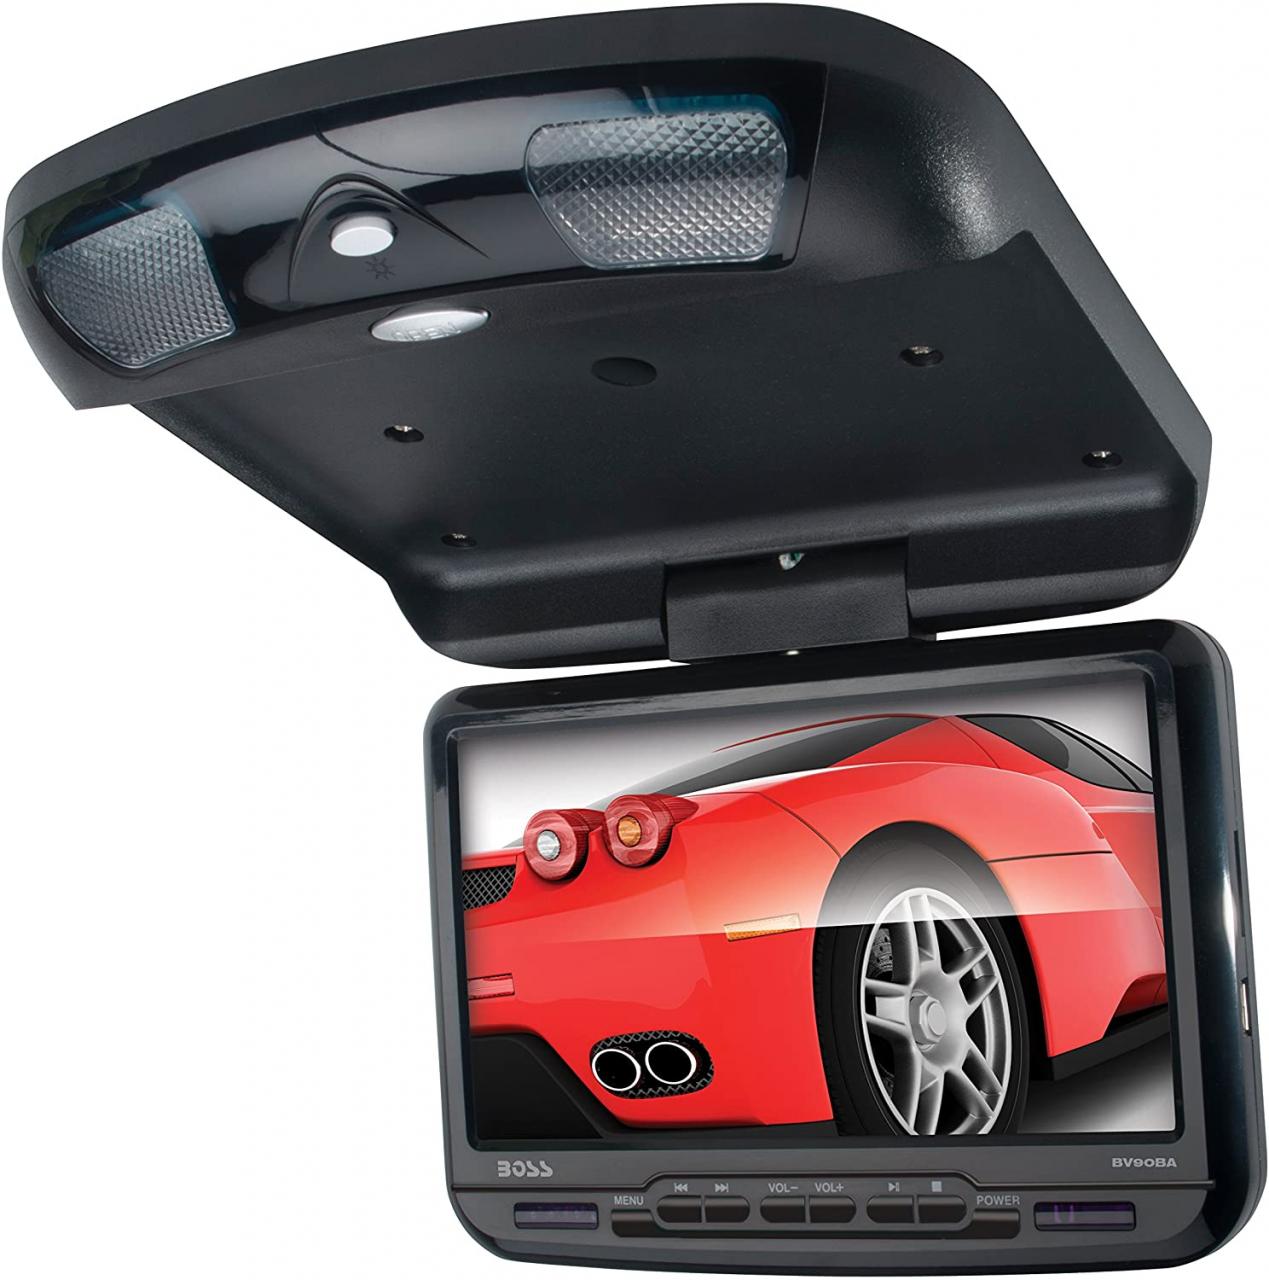 Boss Audio BV12.1BGT Flip-Down 12.1-Inch Widescreen TFT Monitor with  Built-In DVD Player by wide screen monitors - issuu